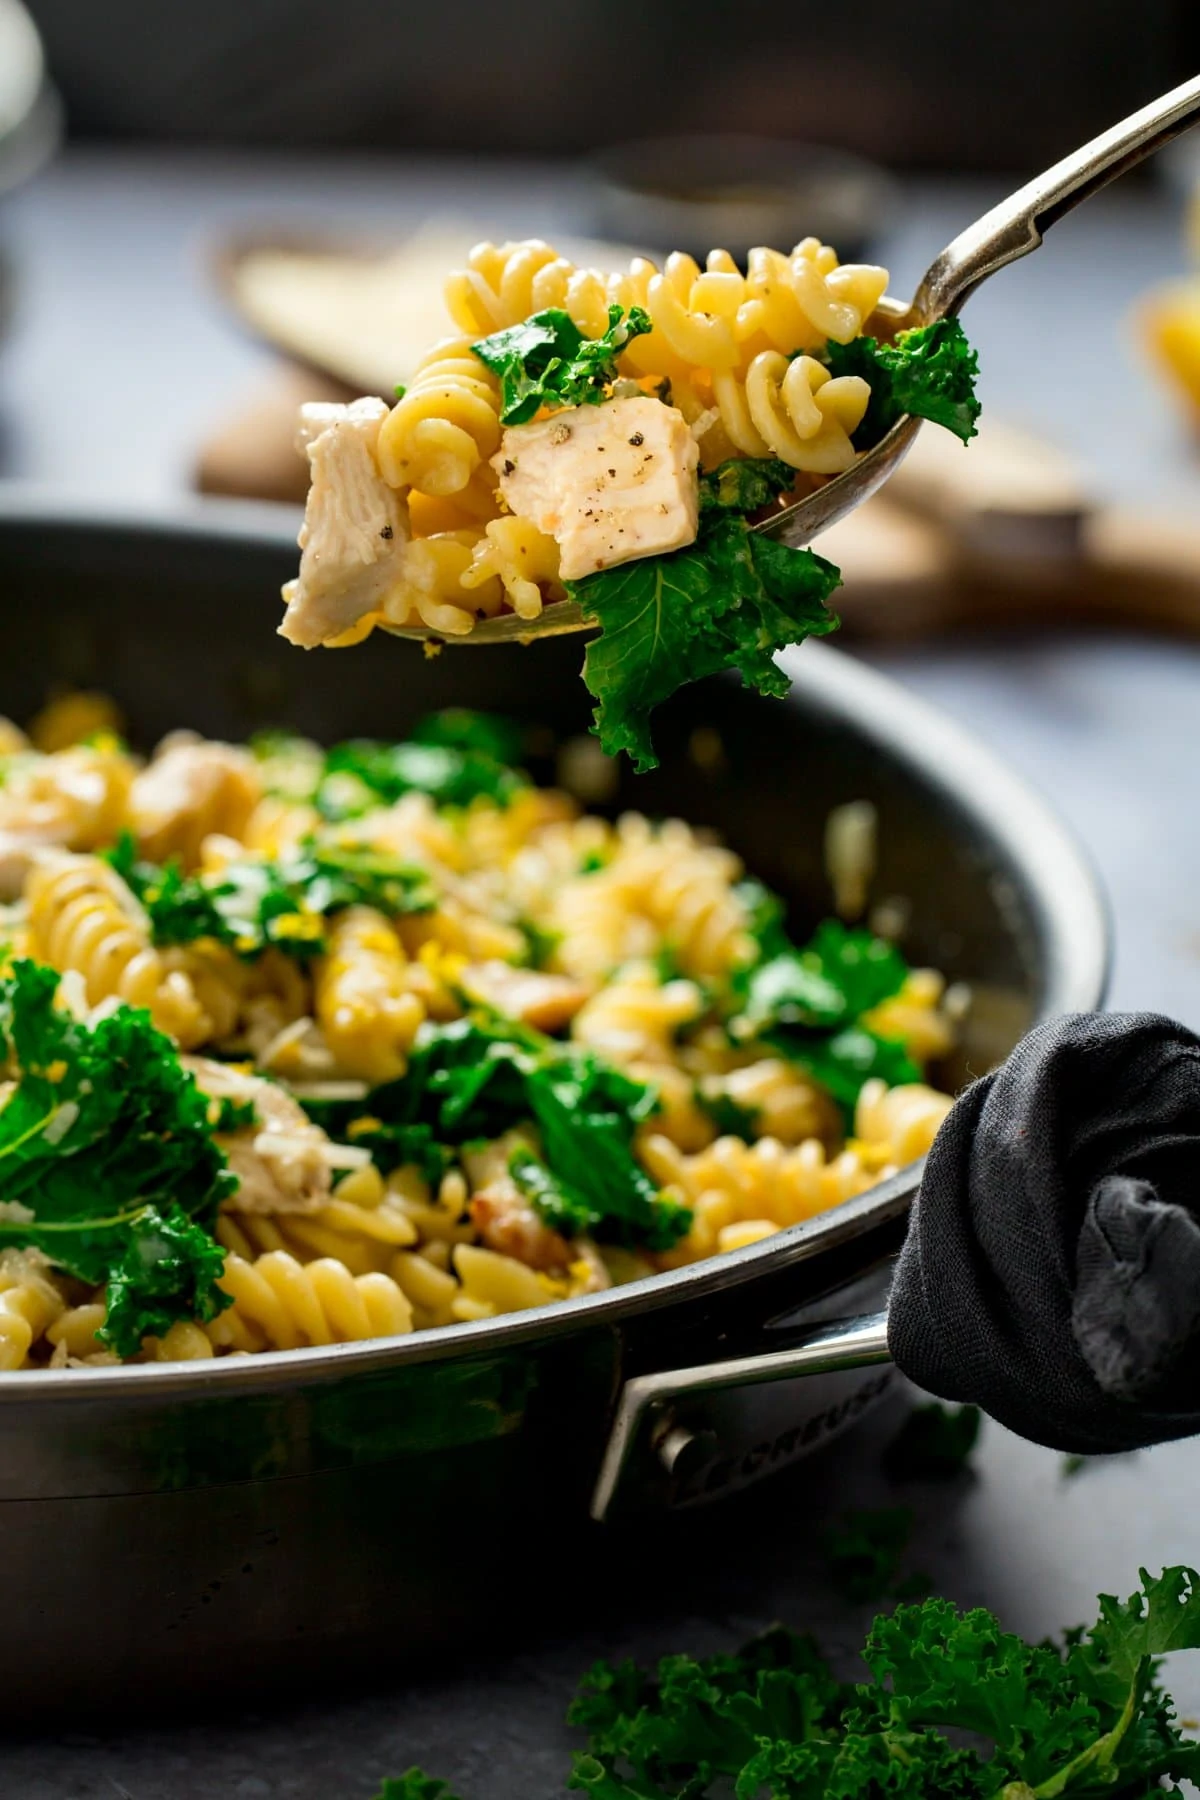 Spoonful being taken from a pan of chicken, kale and pasta